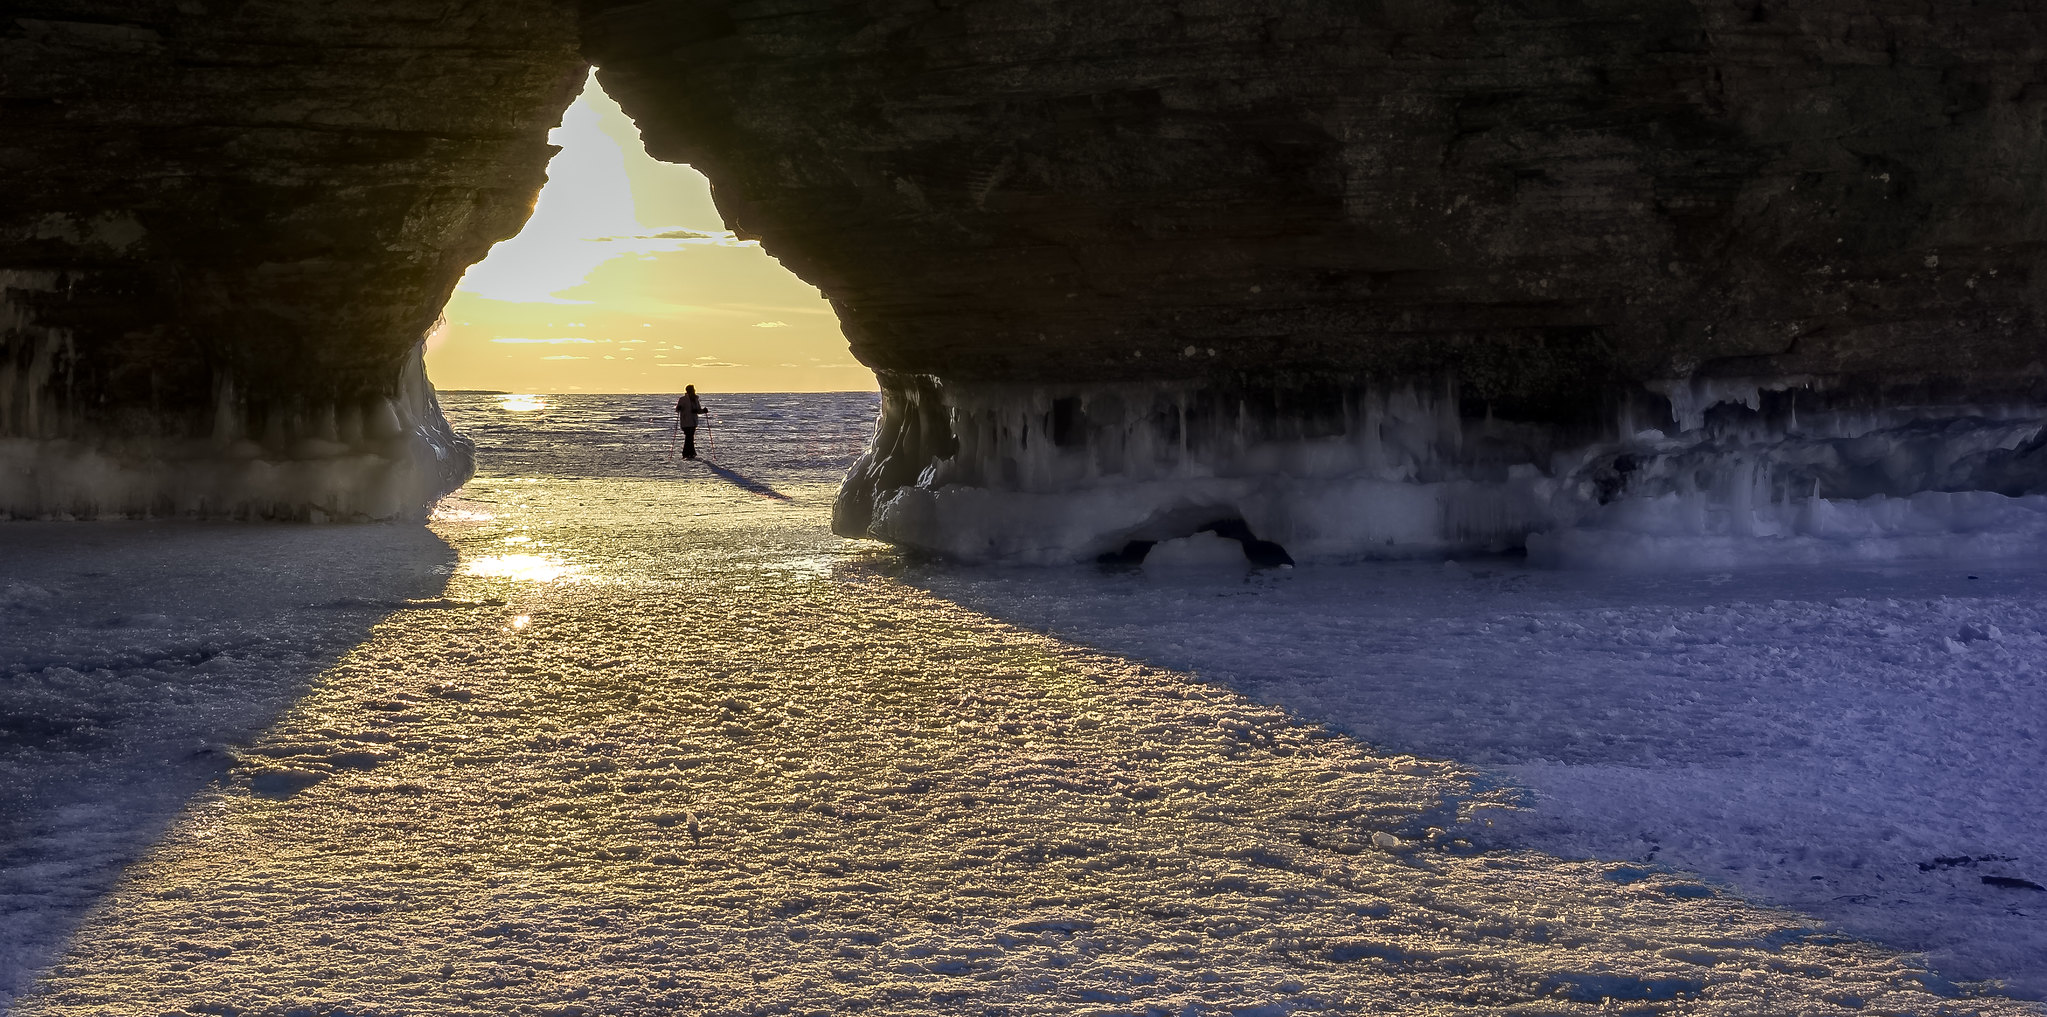 A person is visible in the distance standing between an archway surrounded by frozen surface.